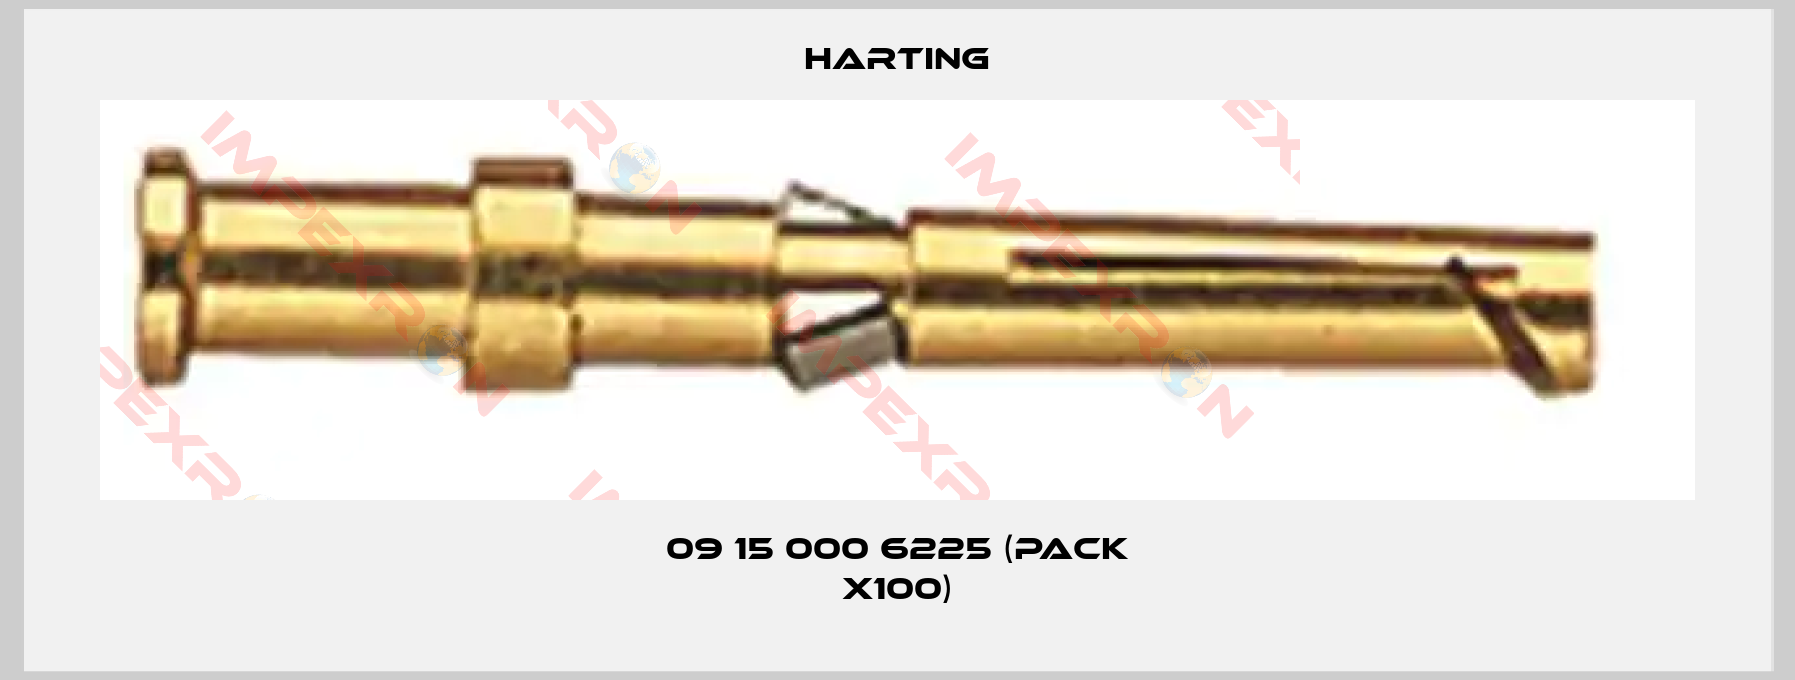 Harting-09 15 000 6225 (pack x100)